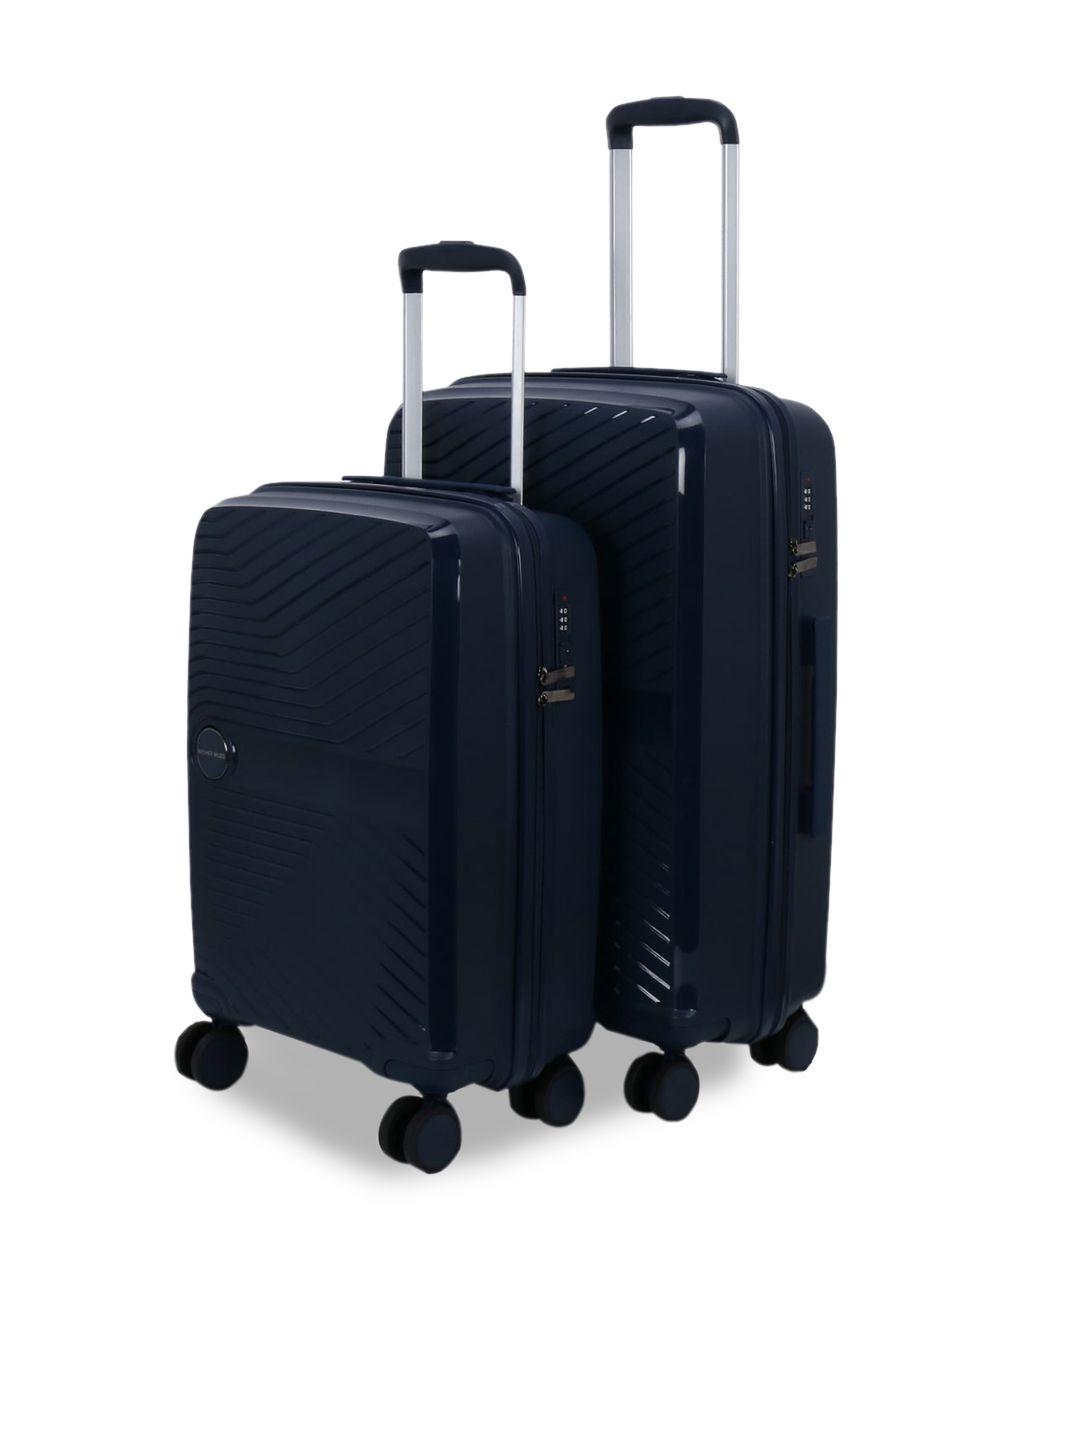 nasher miles set of 2 navy blue textured hard-sided trolley suitcase